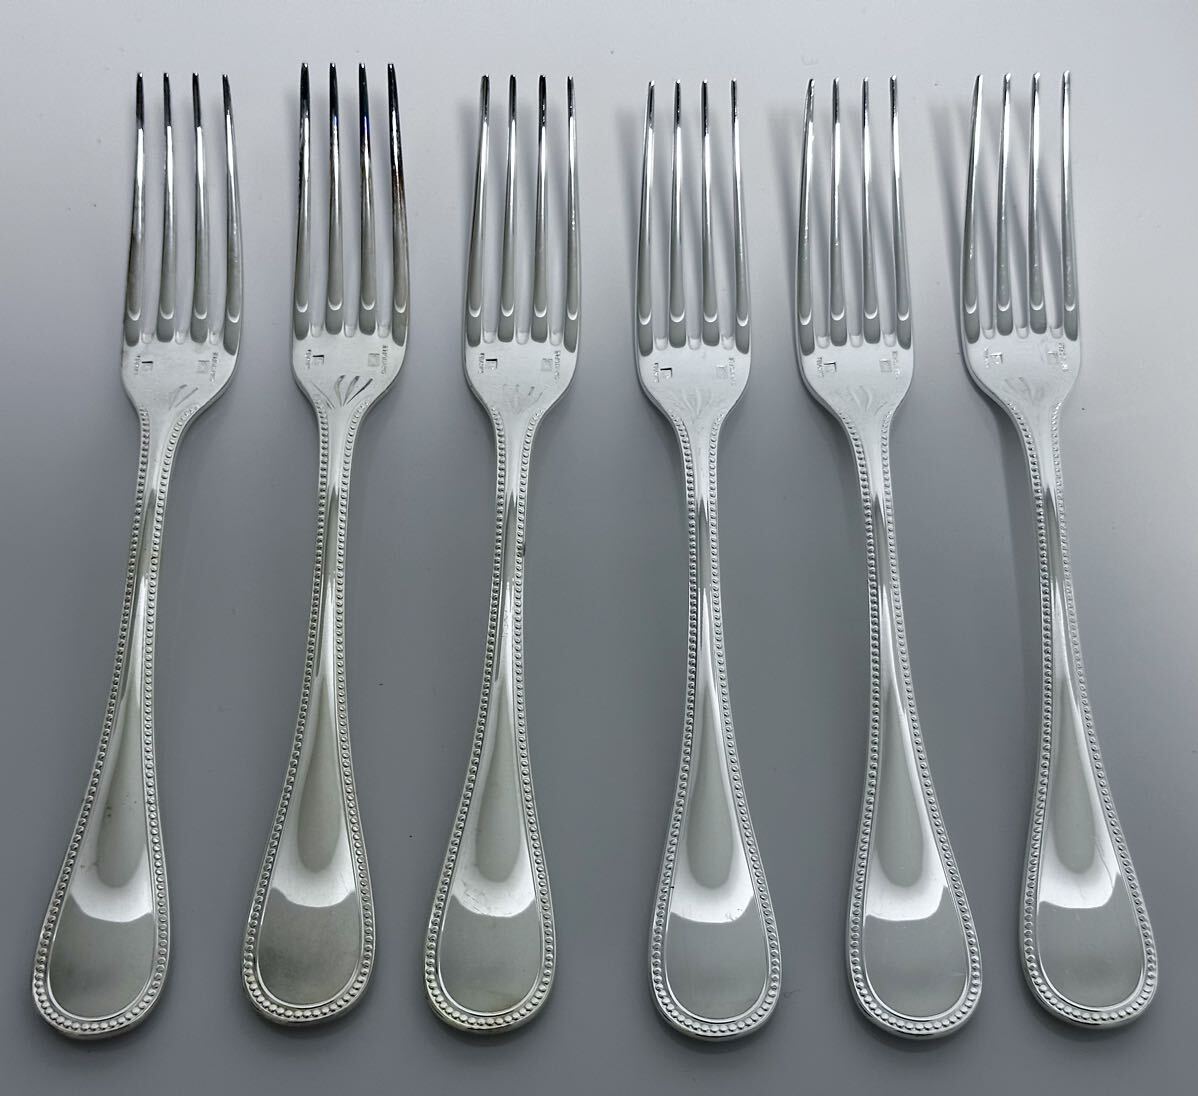 1 jpy ~ * Chris to full Christofle cutlery set / spoon 6 point * Fork 6 point * knife 6 point / * knife 5 point is unopened /. summarize 18 point 